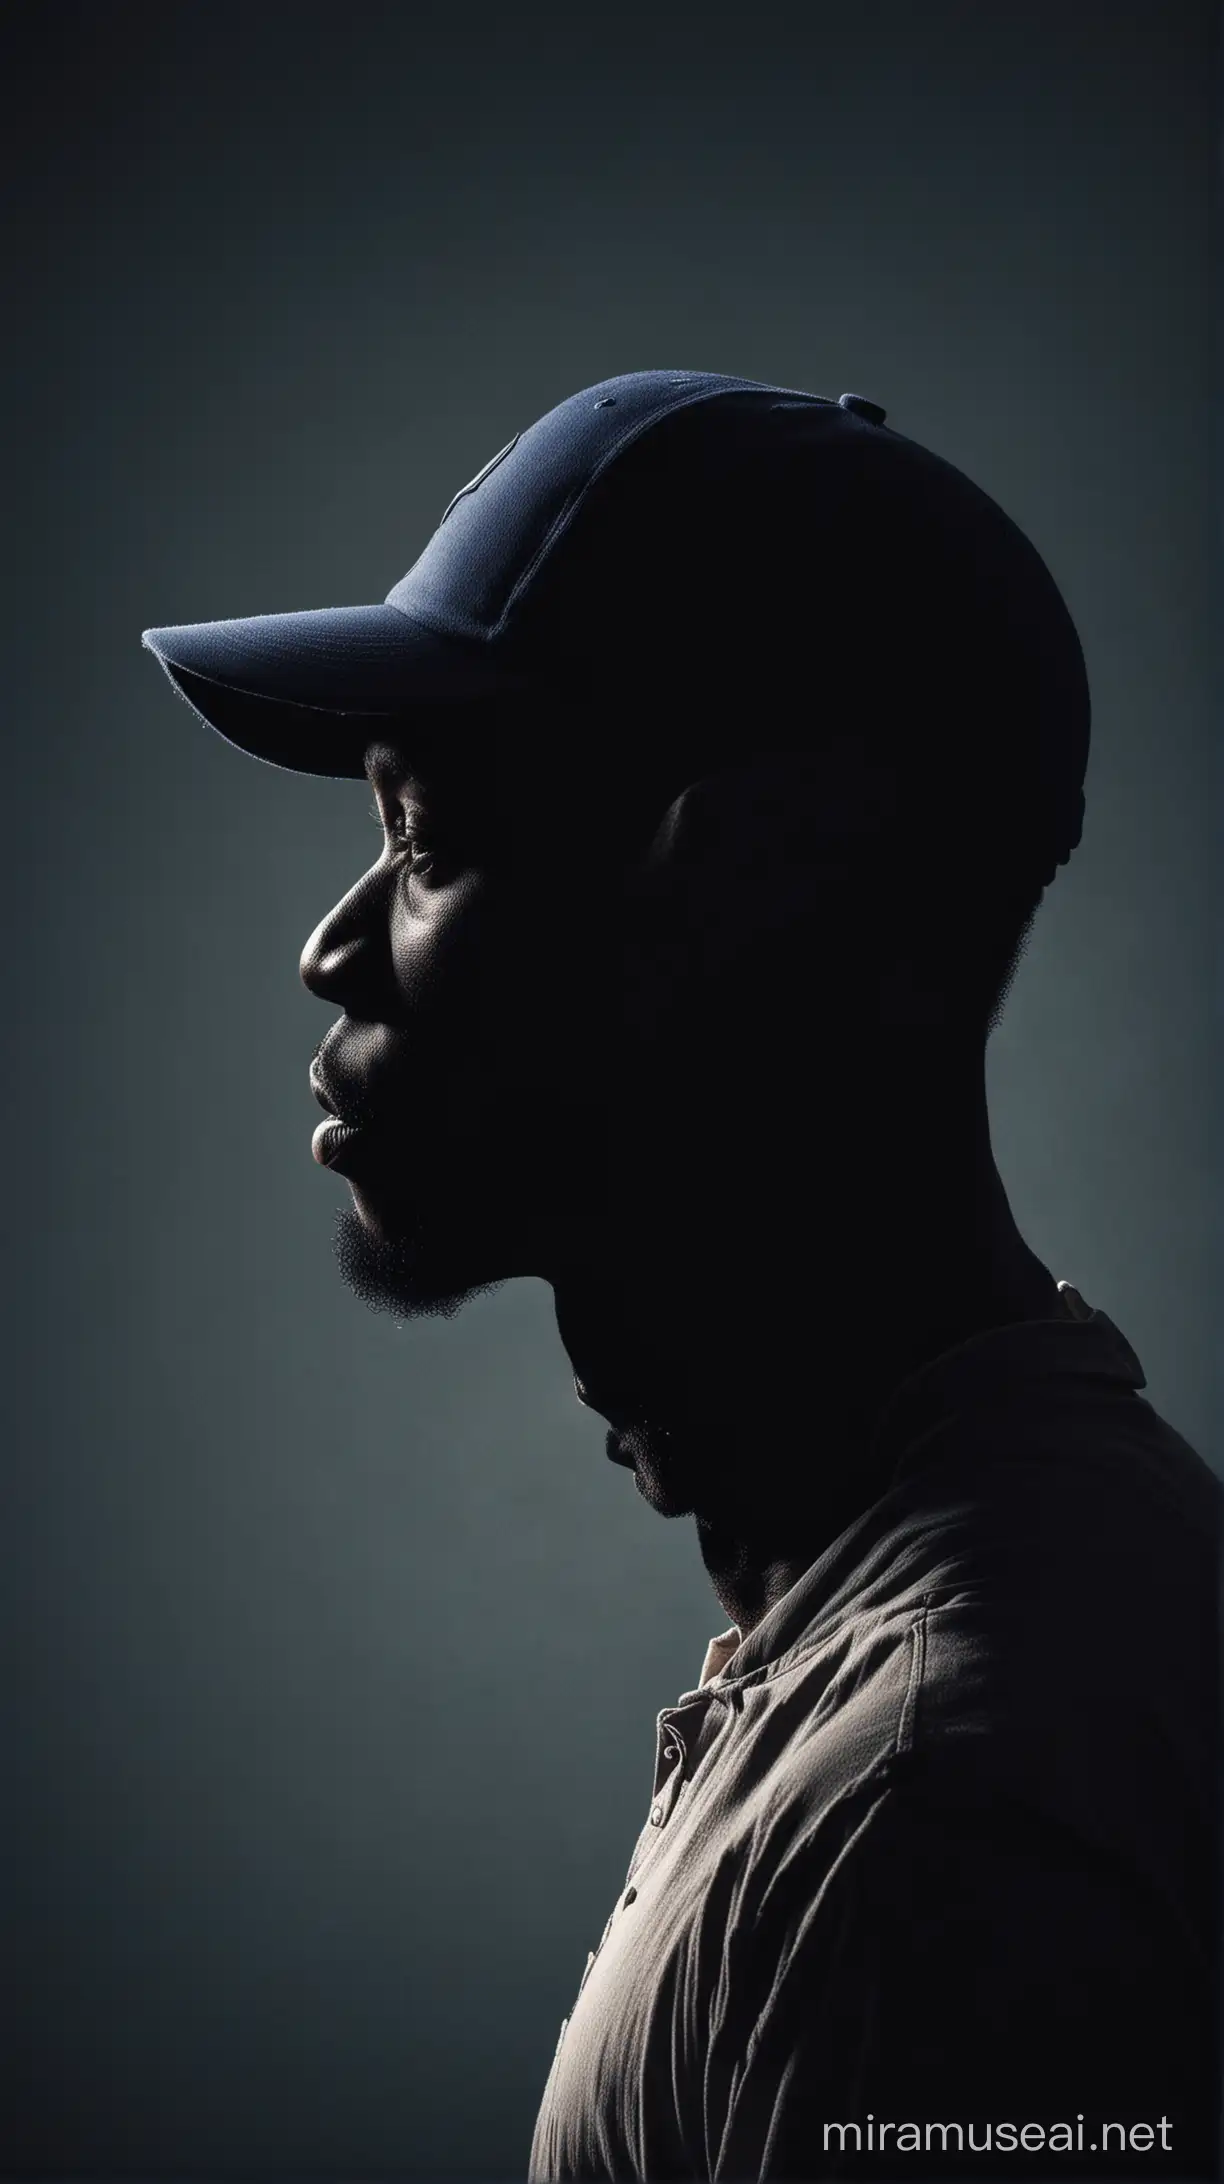 Silhouette in profile from the chest to top of head of a proud African American baseball player. He is wearing an old fashioned baseball cap on his head. The silhouette is dark blue. 